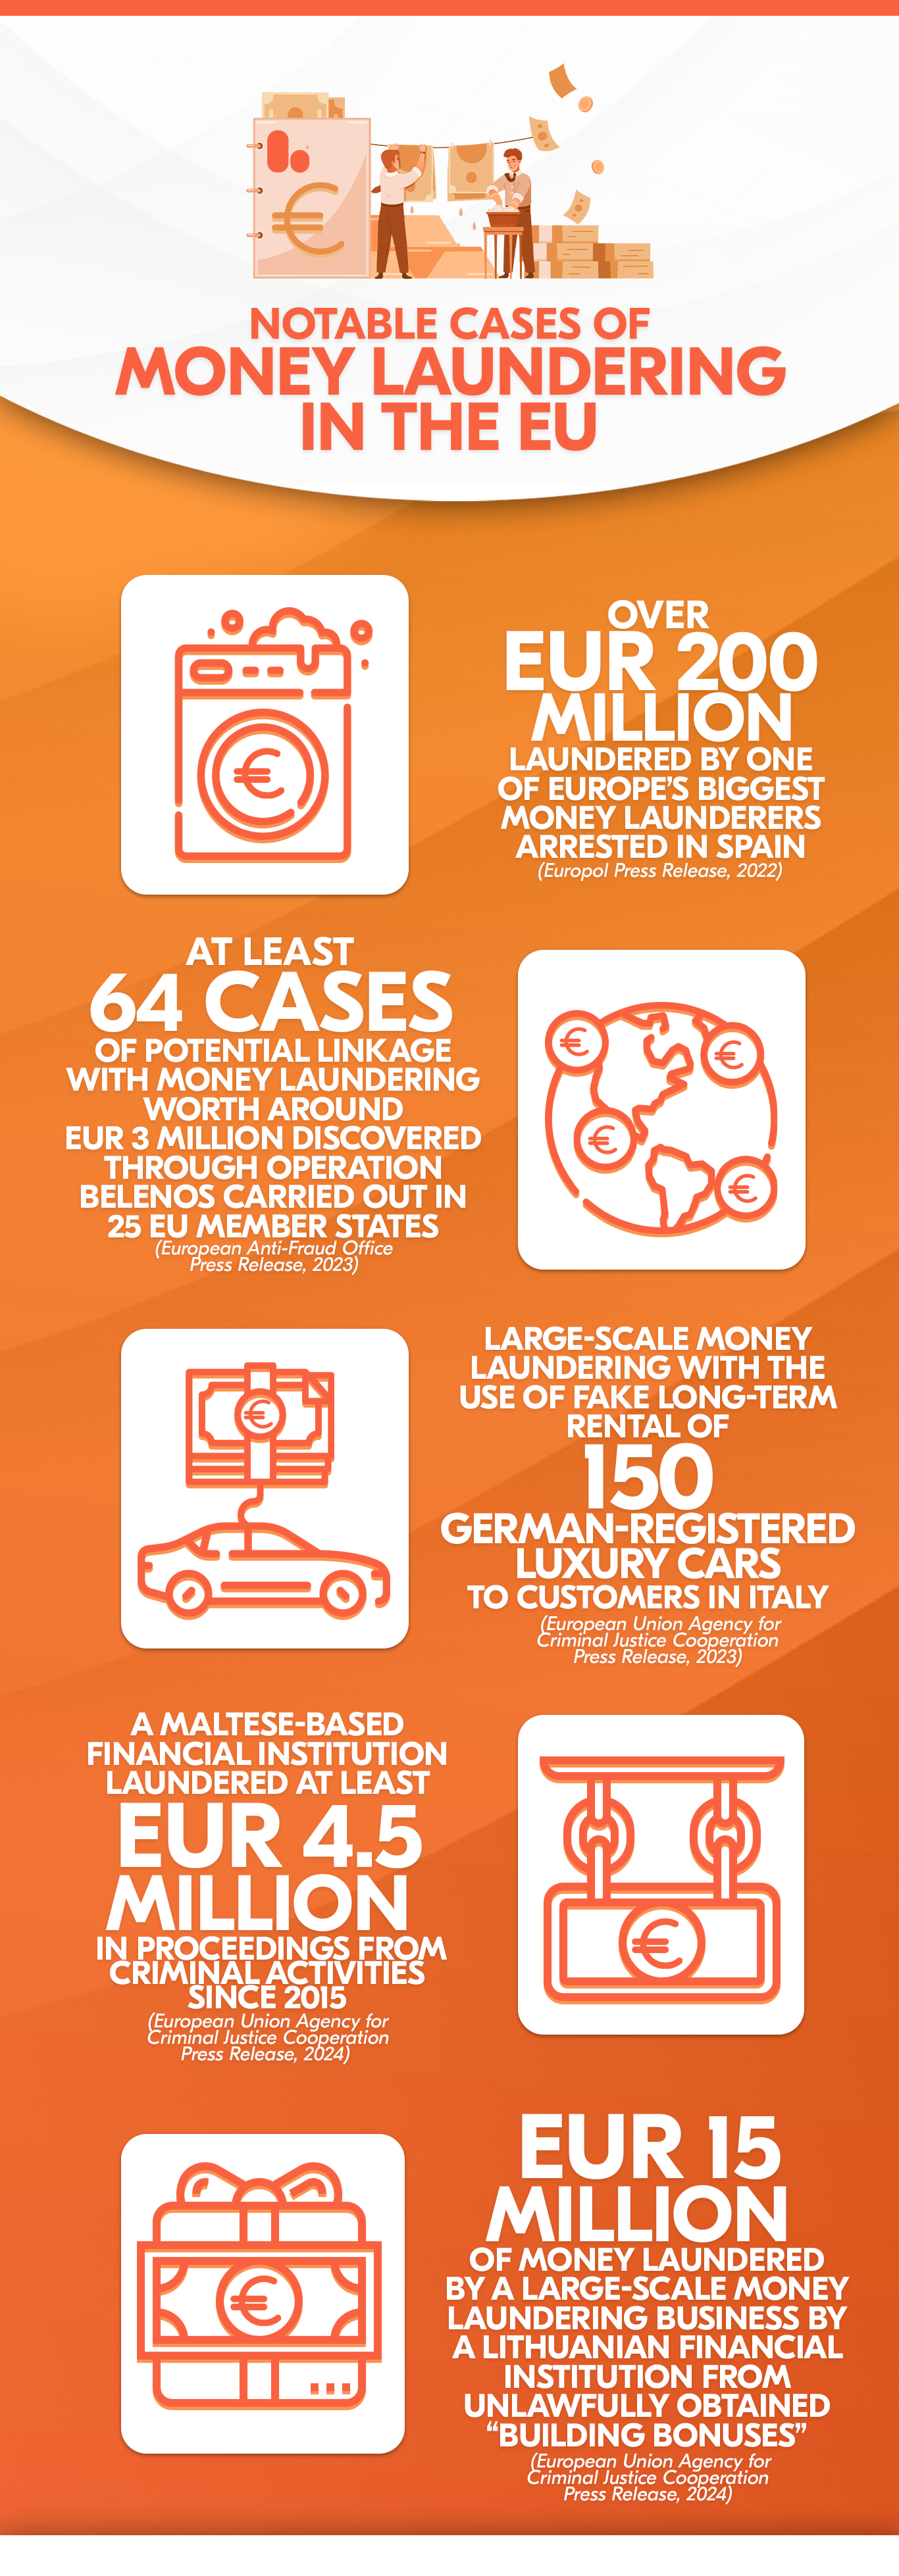 Notable Cases of Money Laundering in the EU